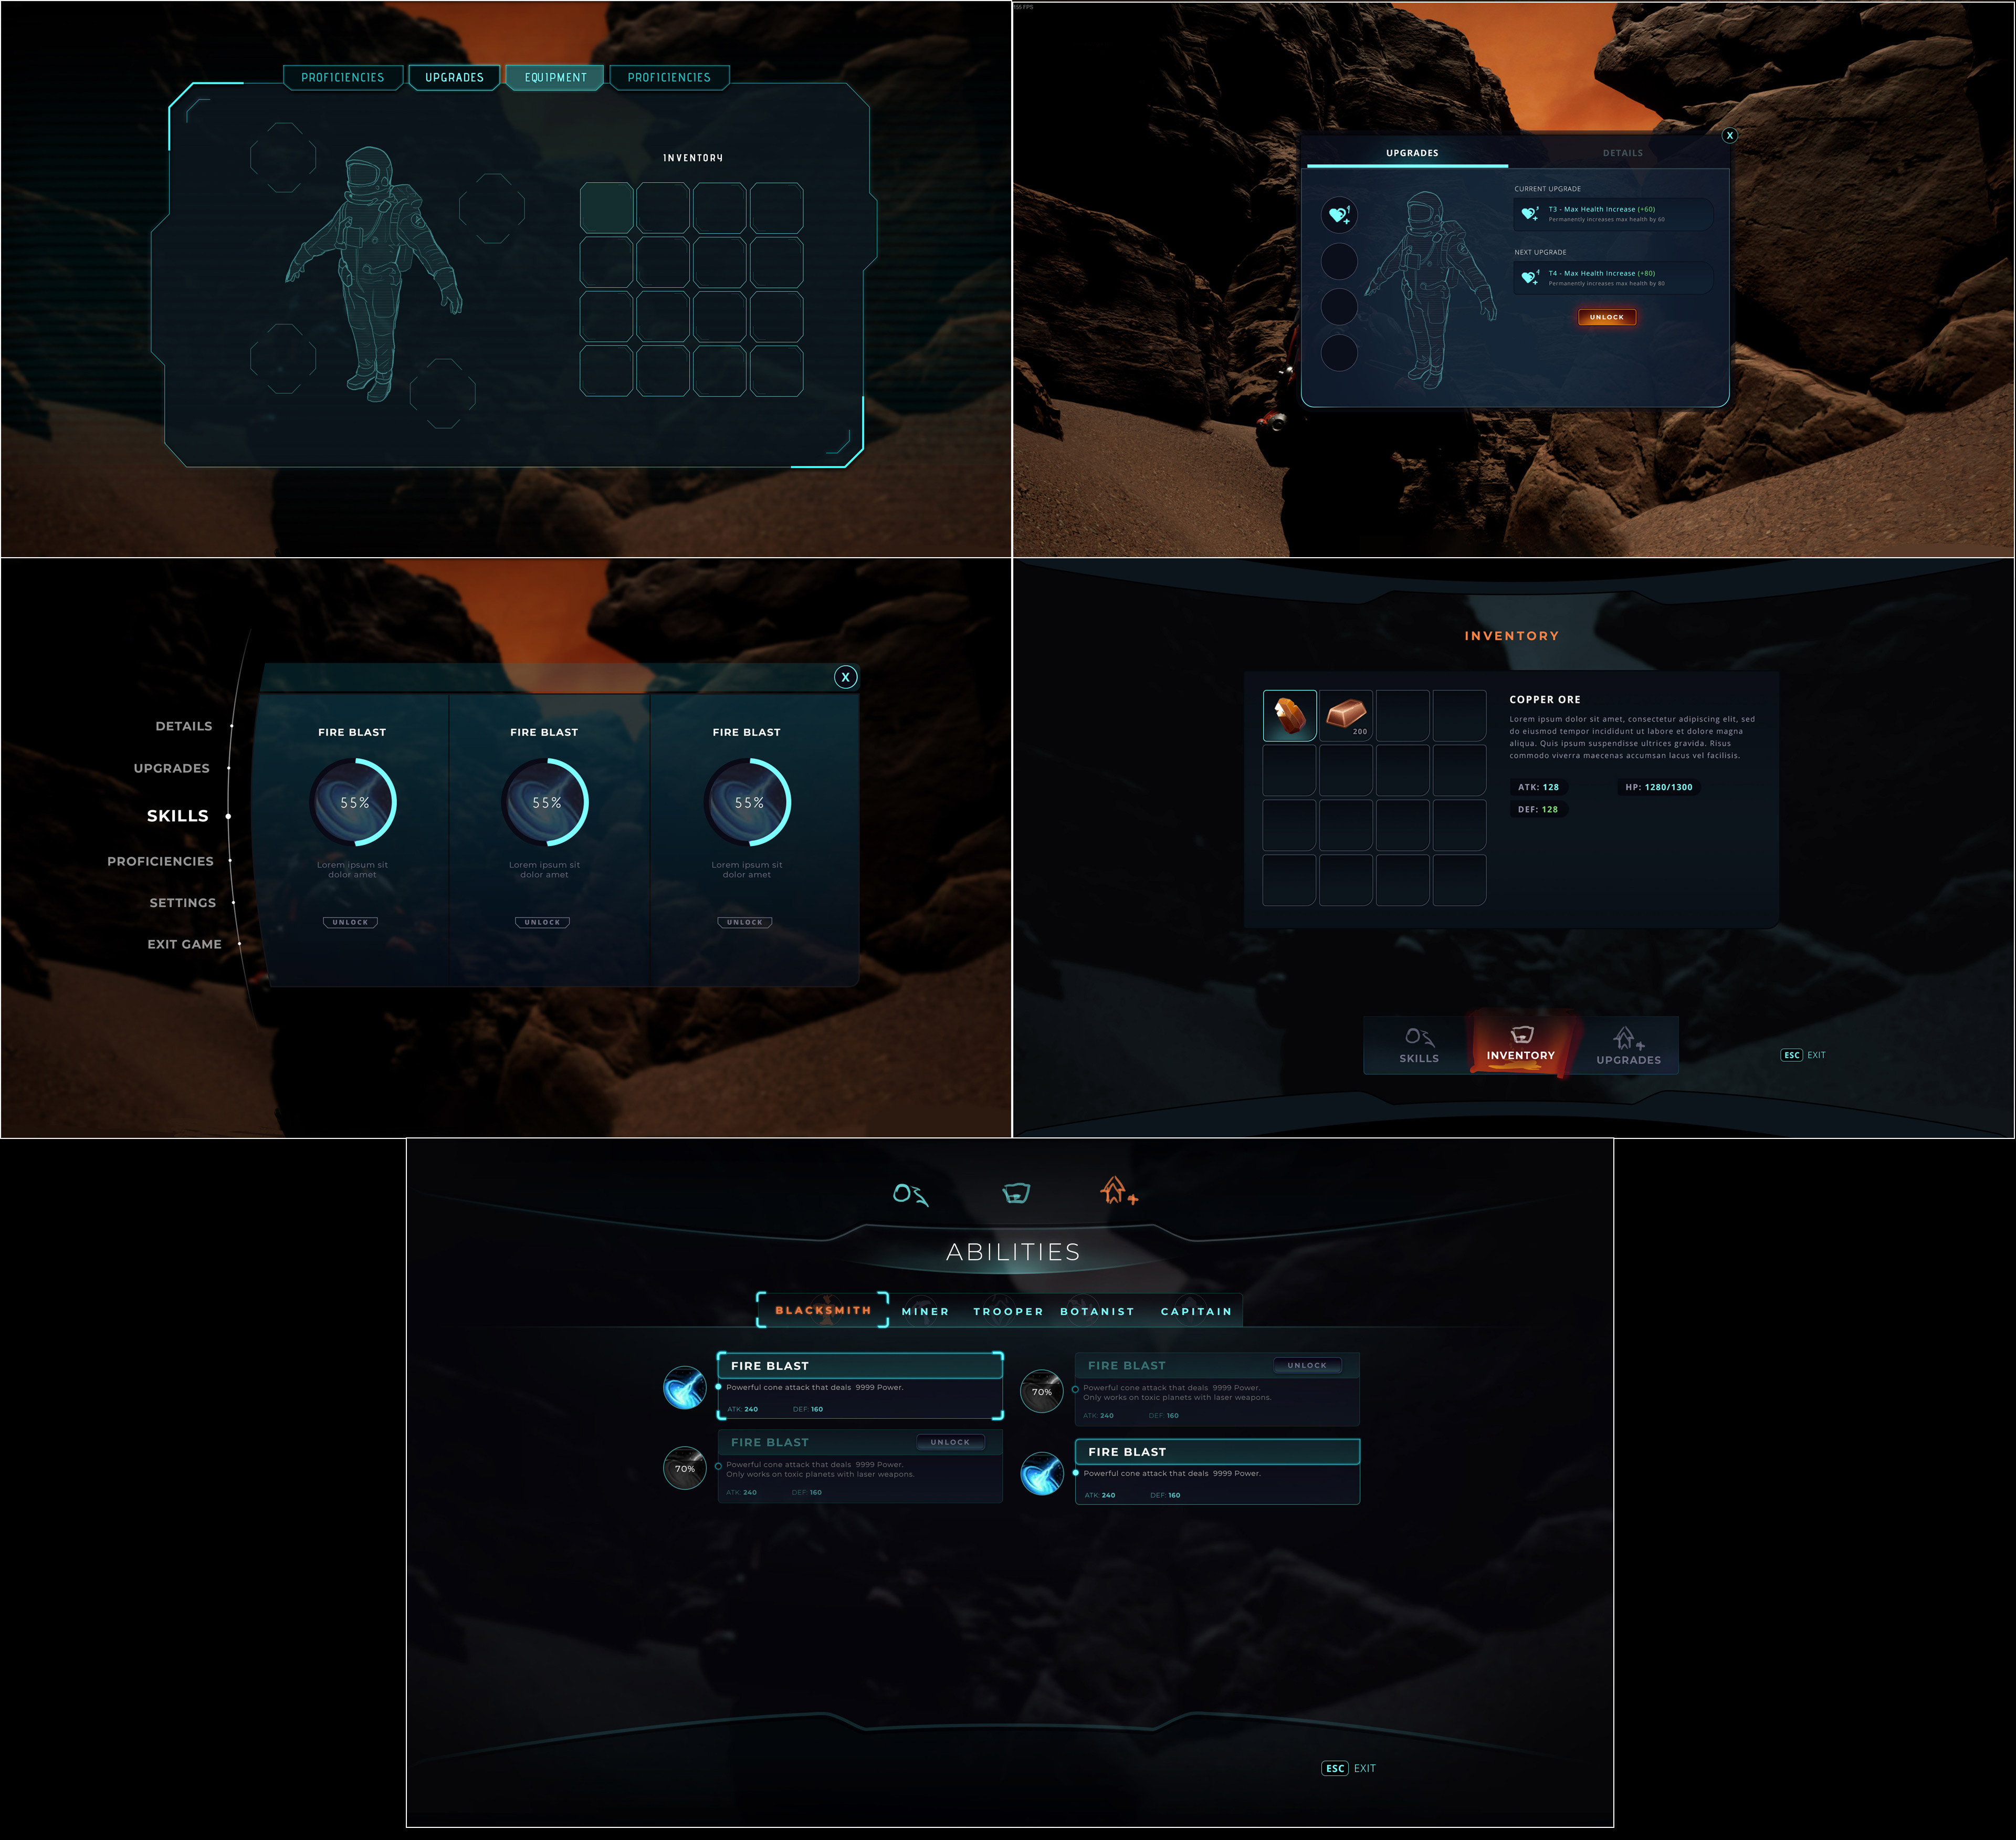 First concepts and explorations of an in-game menu with inventory, upgrades, etc. Made in Photoshop 